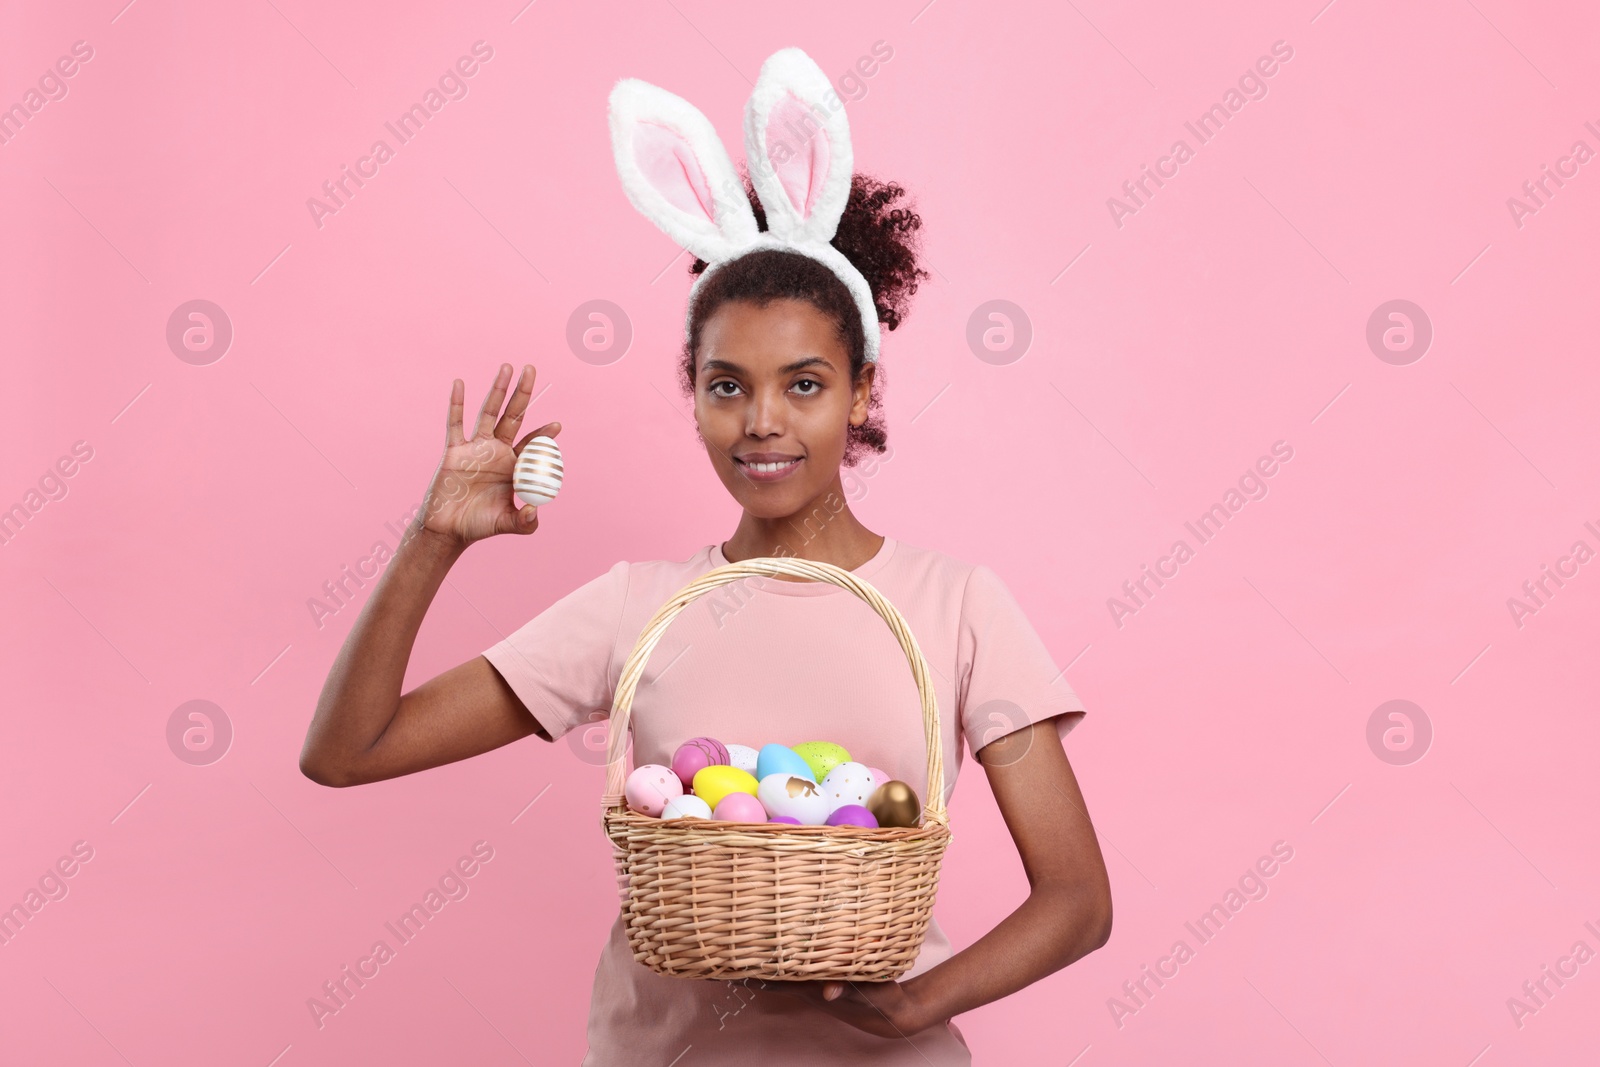 Photo of Happy African American woman in bunny ears headband holding wicker basket with Easter eggs on pink background